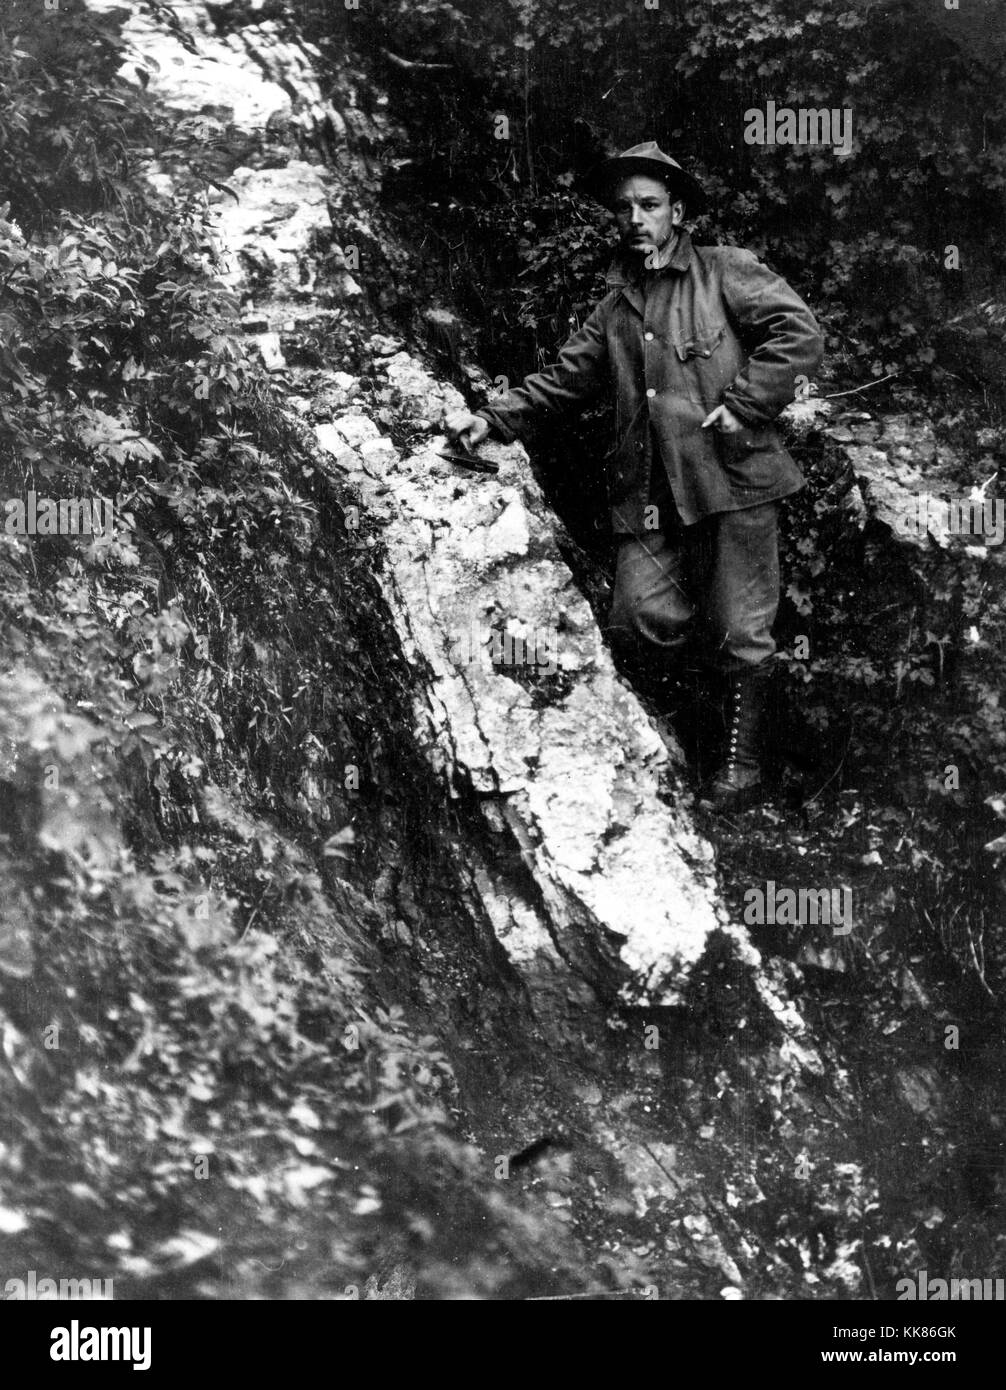 Prospector standing next to a gold-bearing quartz vein on the property of the Seward Bonanza Gold Mines Co during a gold rush, near mile 20 of the Alaska Northern Railway (Tustumena district, Cook Inlet region). Image courtesy USGS. September 11, 1911. Stock Photo